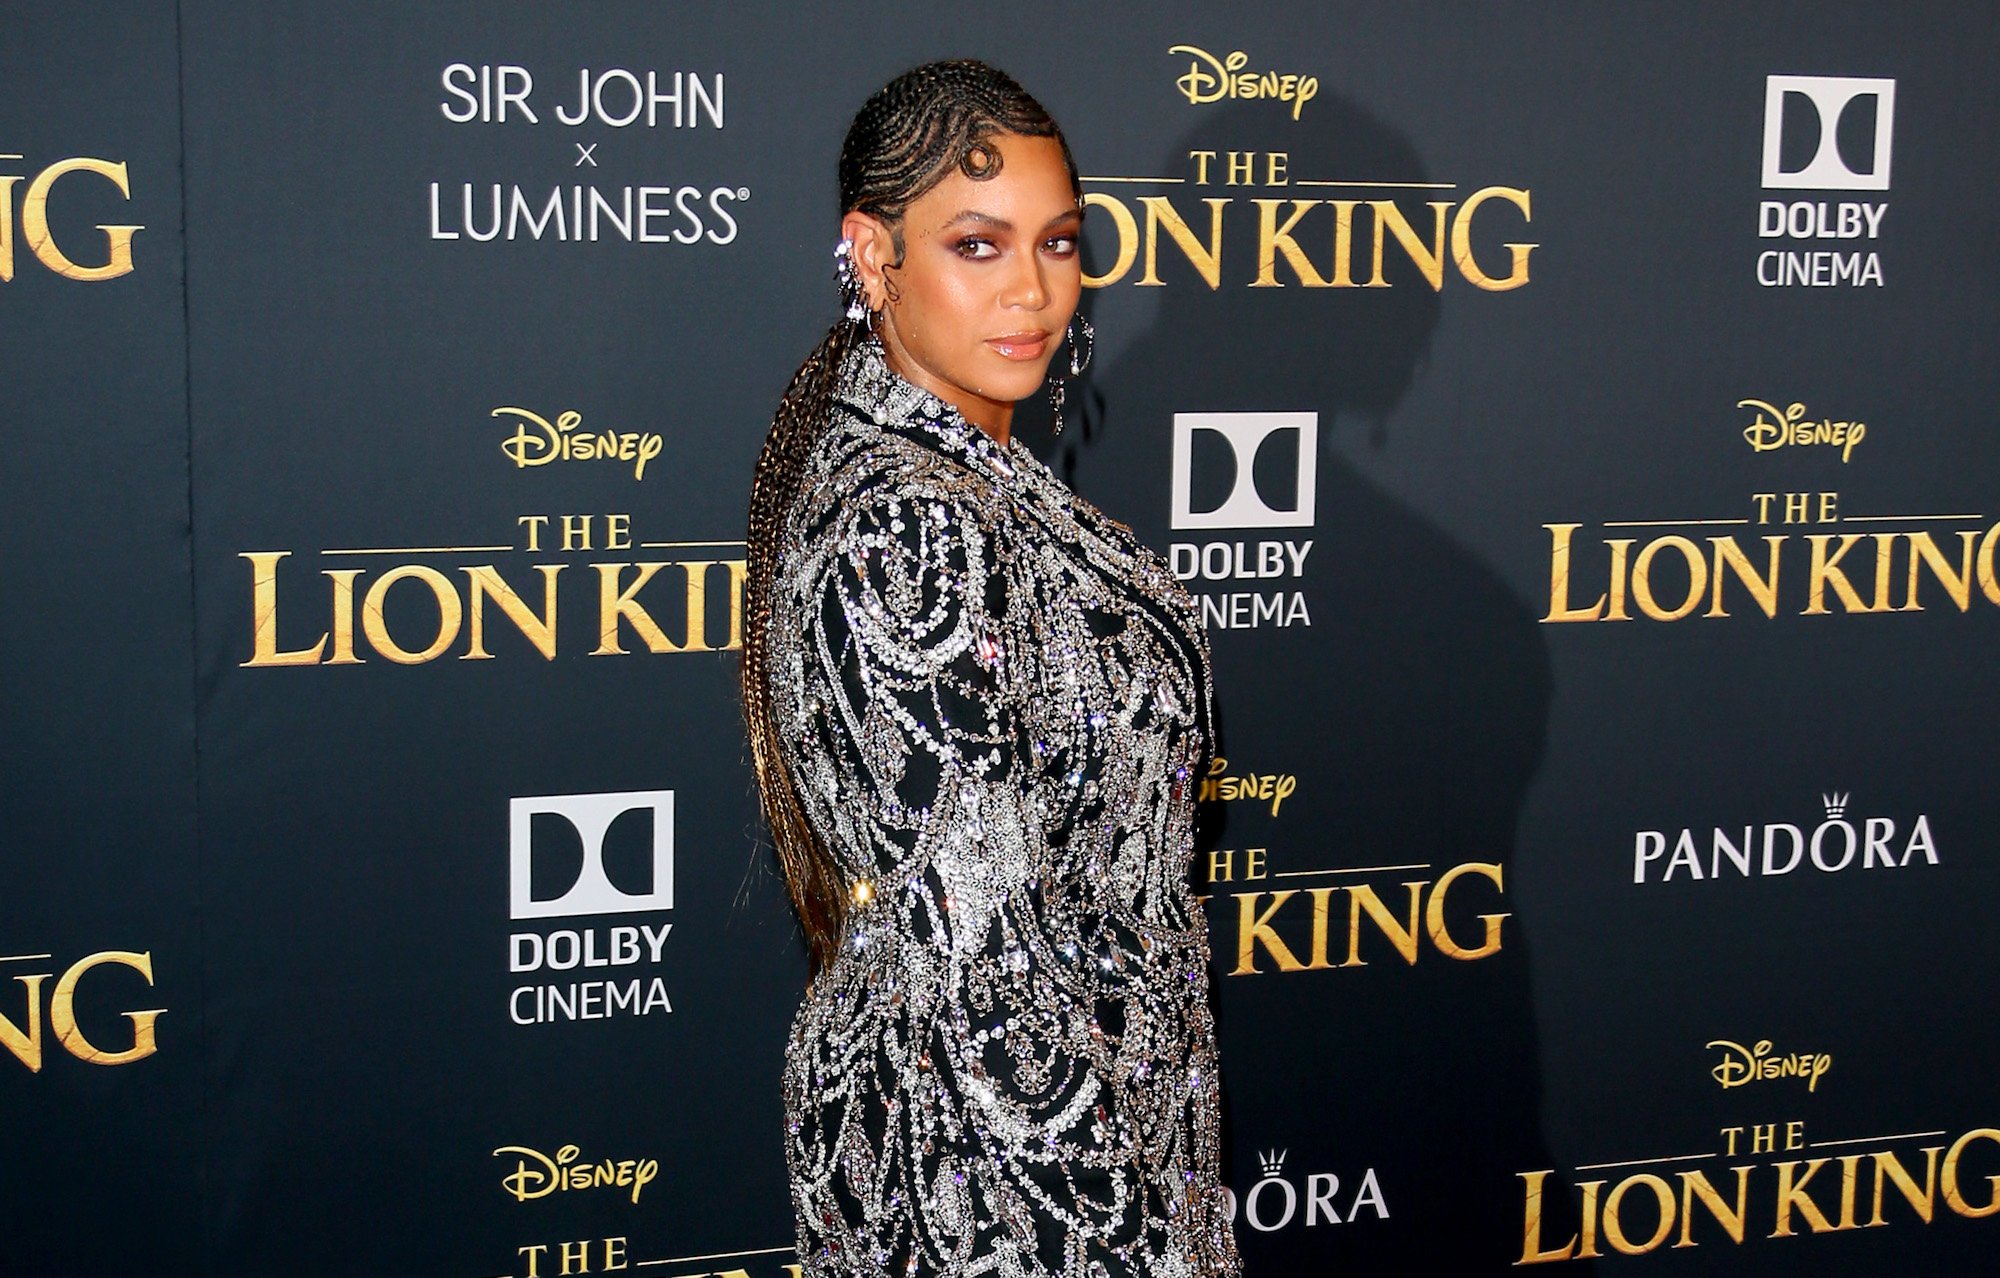 Beyoncé slightly smiling, looking back, in front of a black background with the 'Lion King' logo